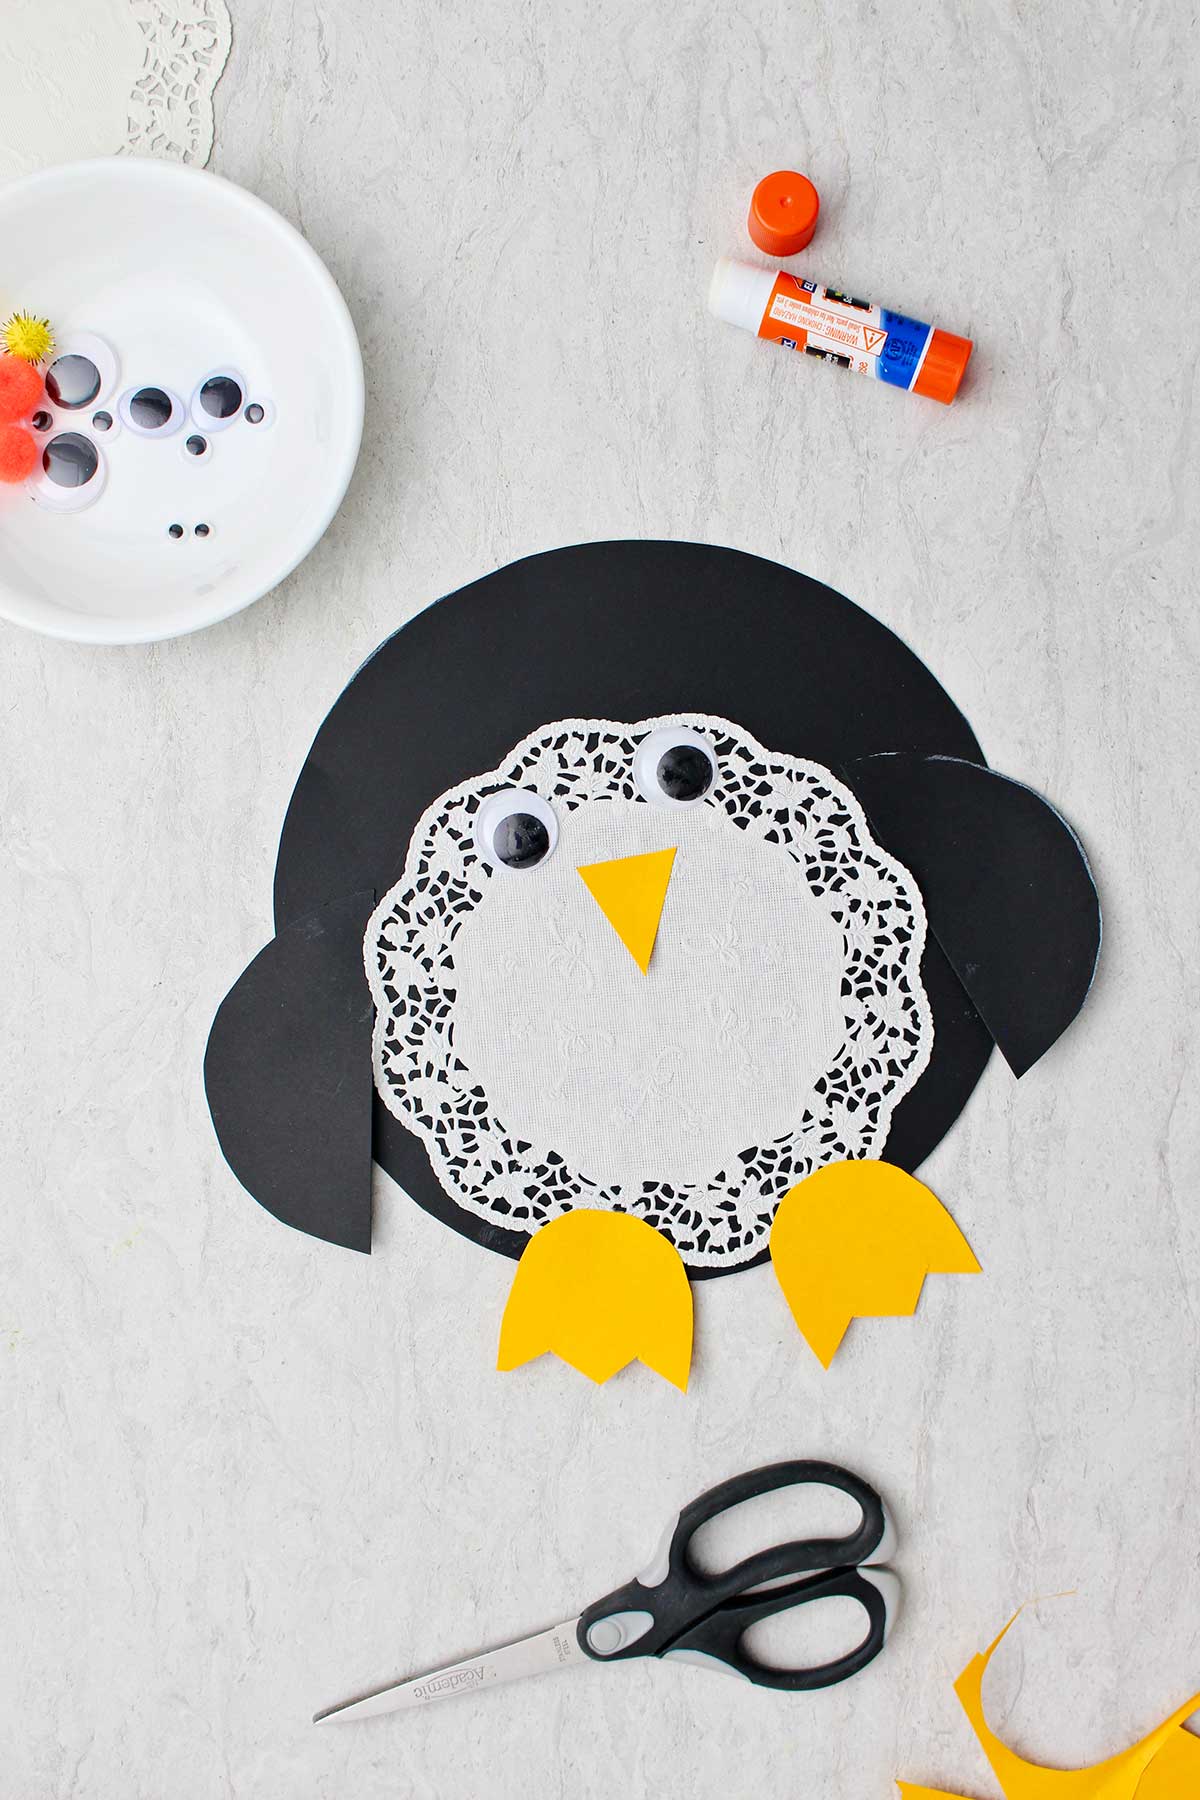 Completed doily Paper Penguin Craft with supplies near by.